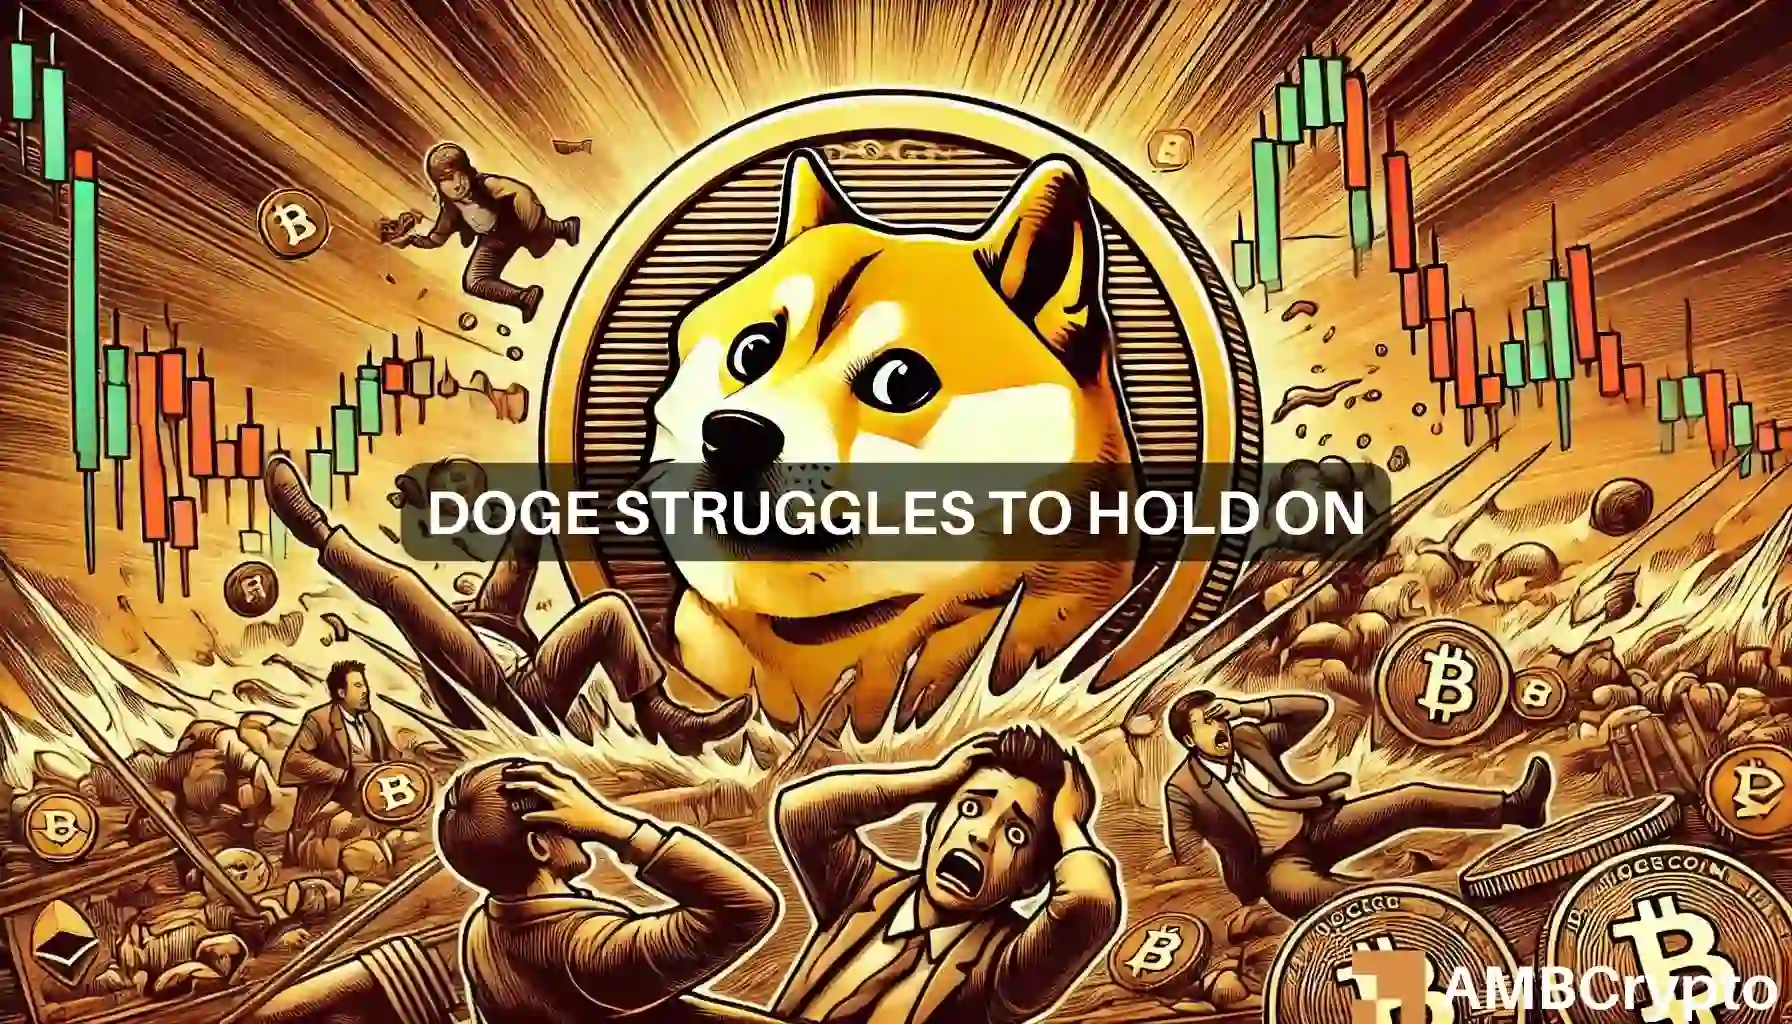 Dogecoin liquidations spike as DOGE hits $0.10: What will happen now?